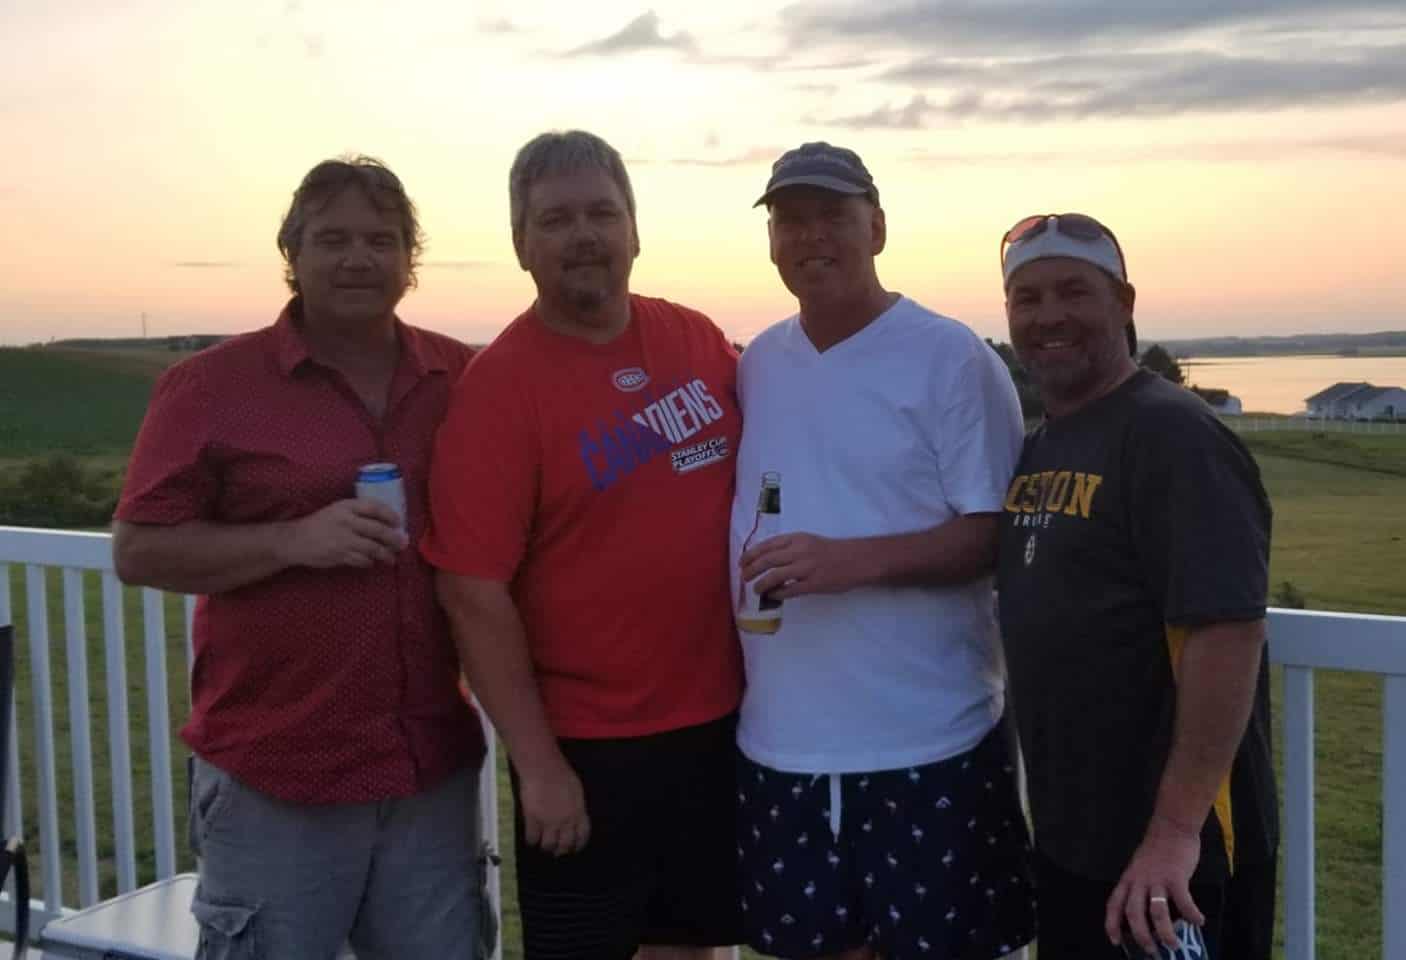 picture of guys on vacation, faces are too dark